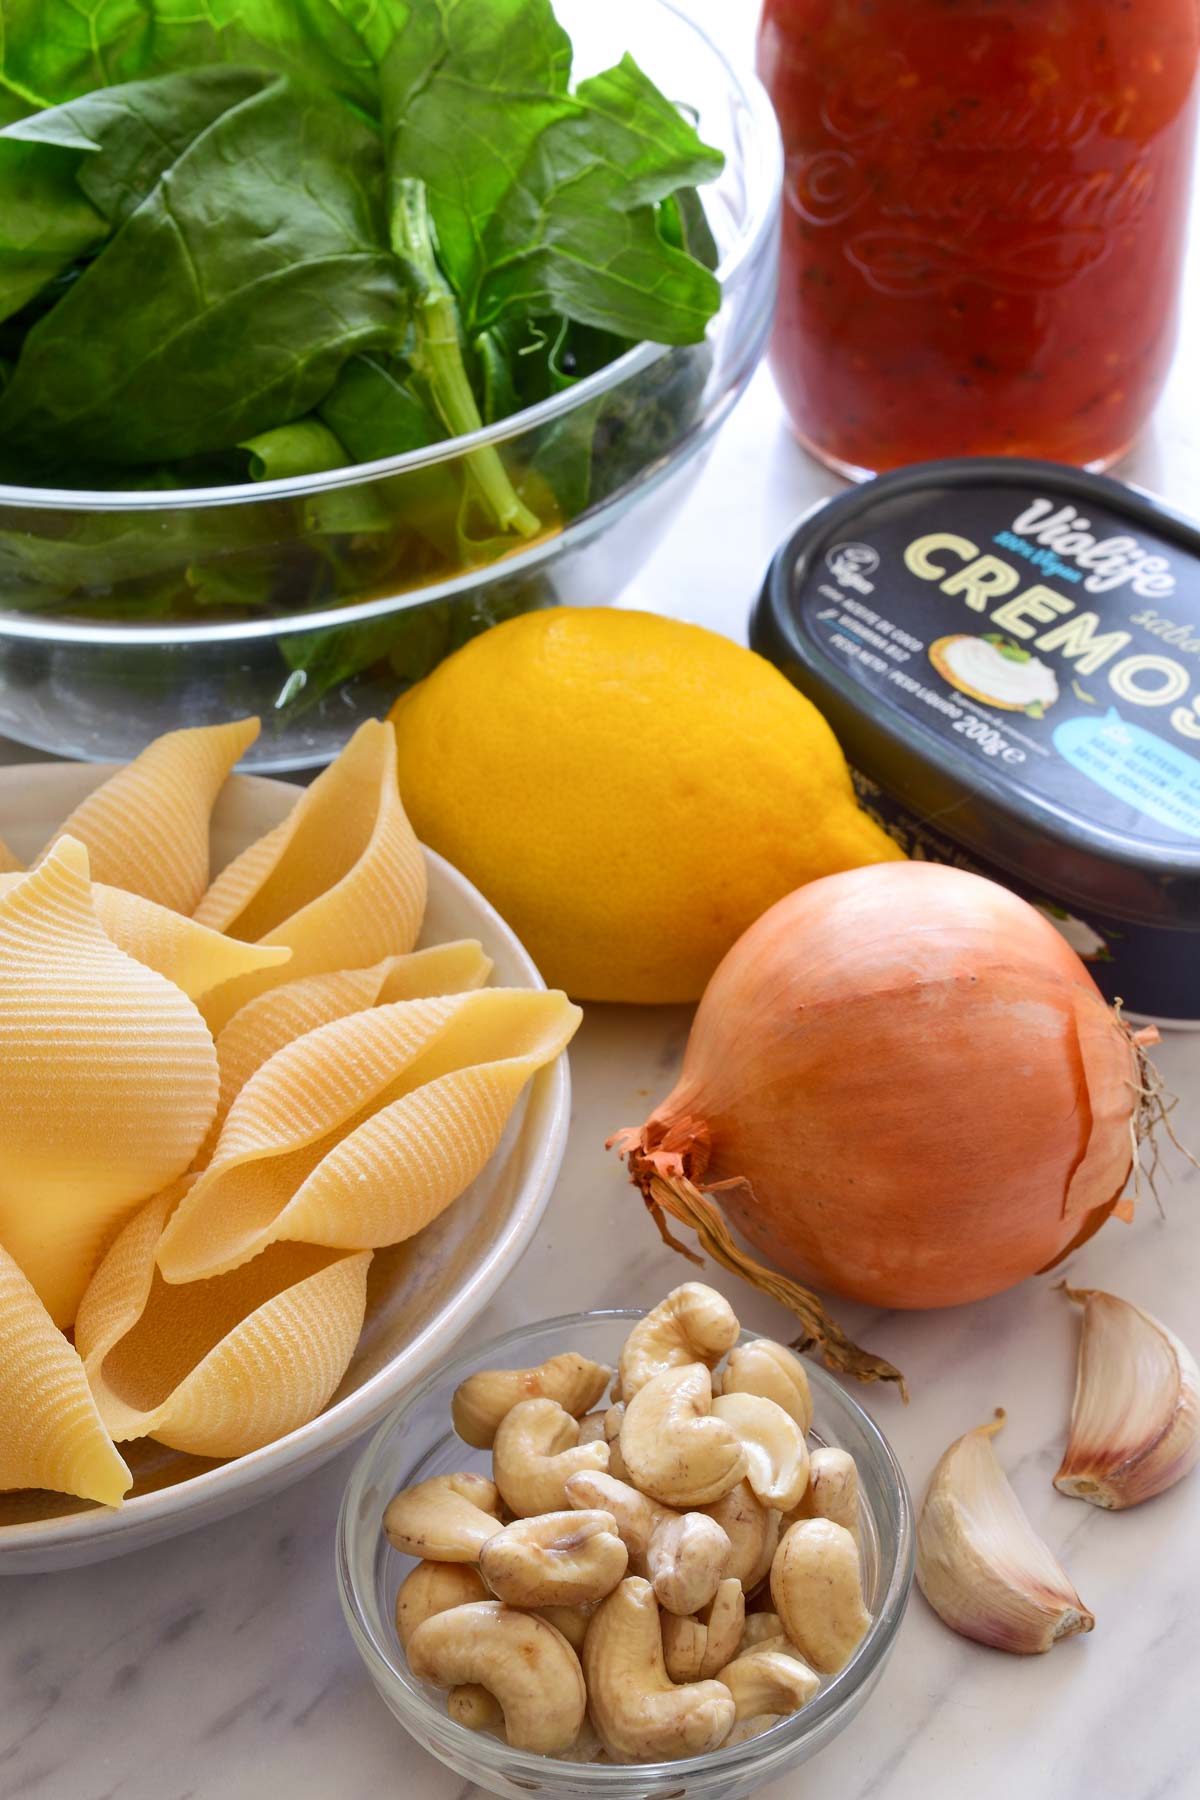 The raw ingredients for vegan stuffed shells displayed on the counter.